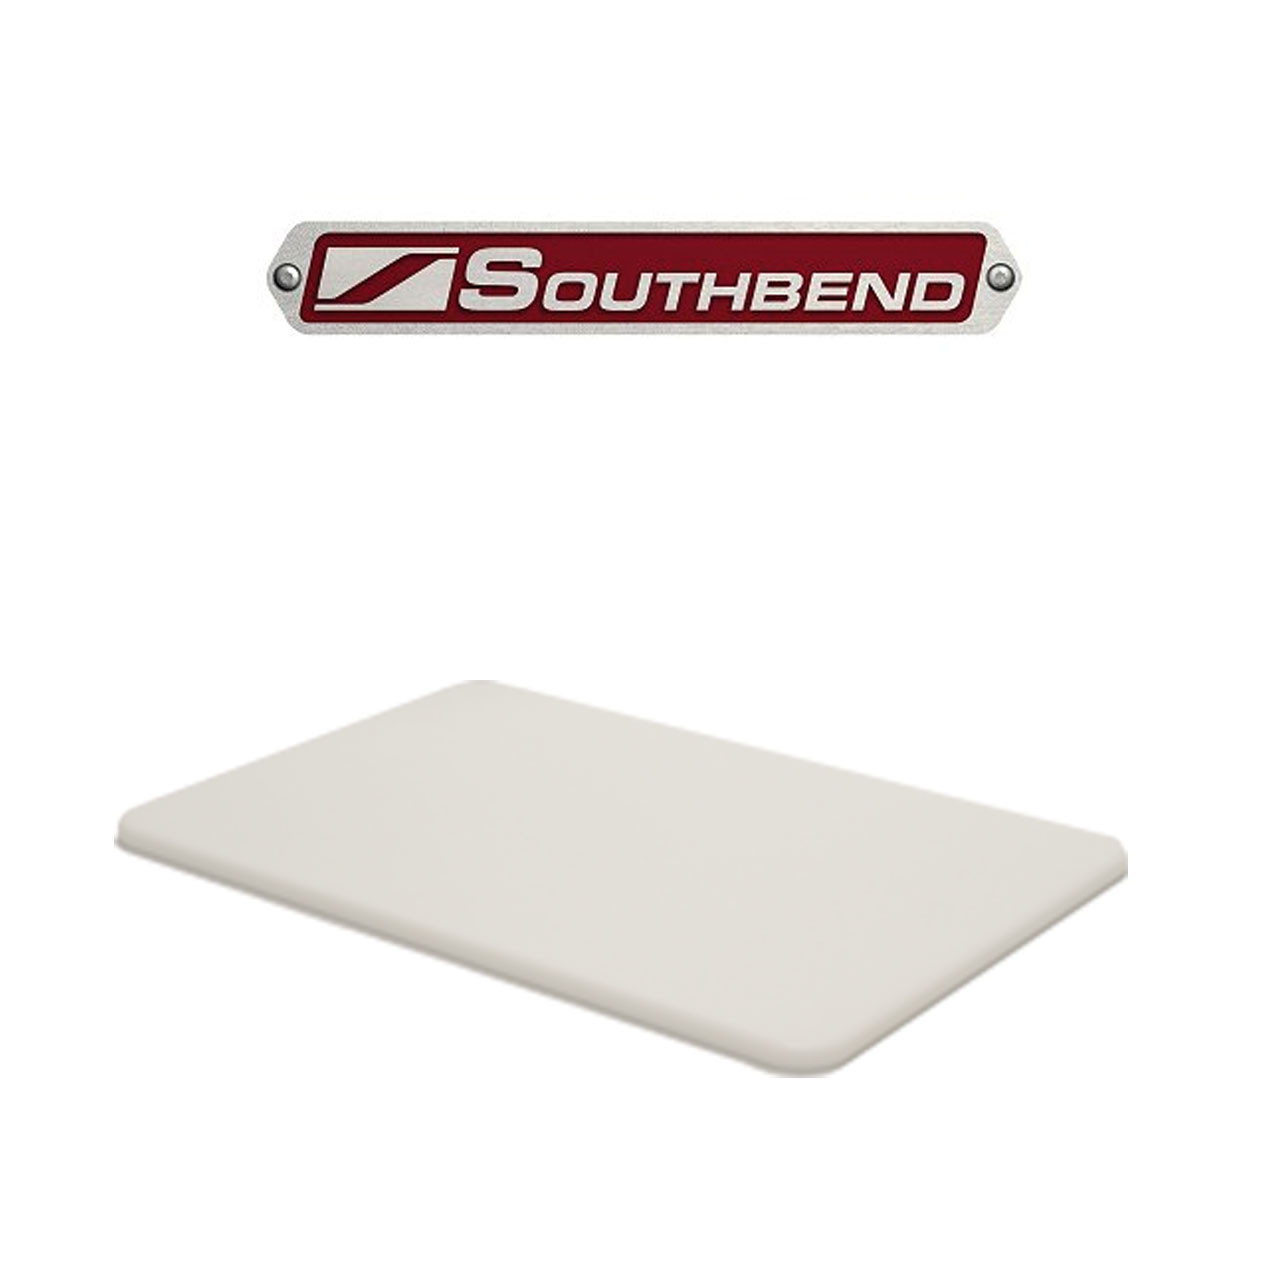 Southbend Range - OB 4-2-54-E Cutting Board - Cutting Board Company -  Commercial Quality Plastic and Richlite Custom Sized Cutting Boards